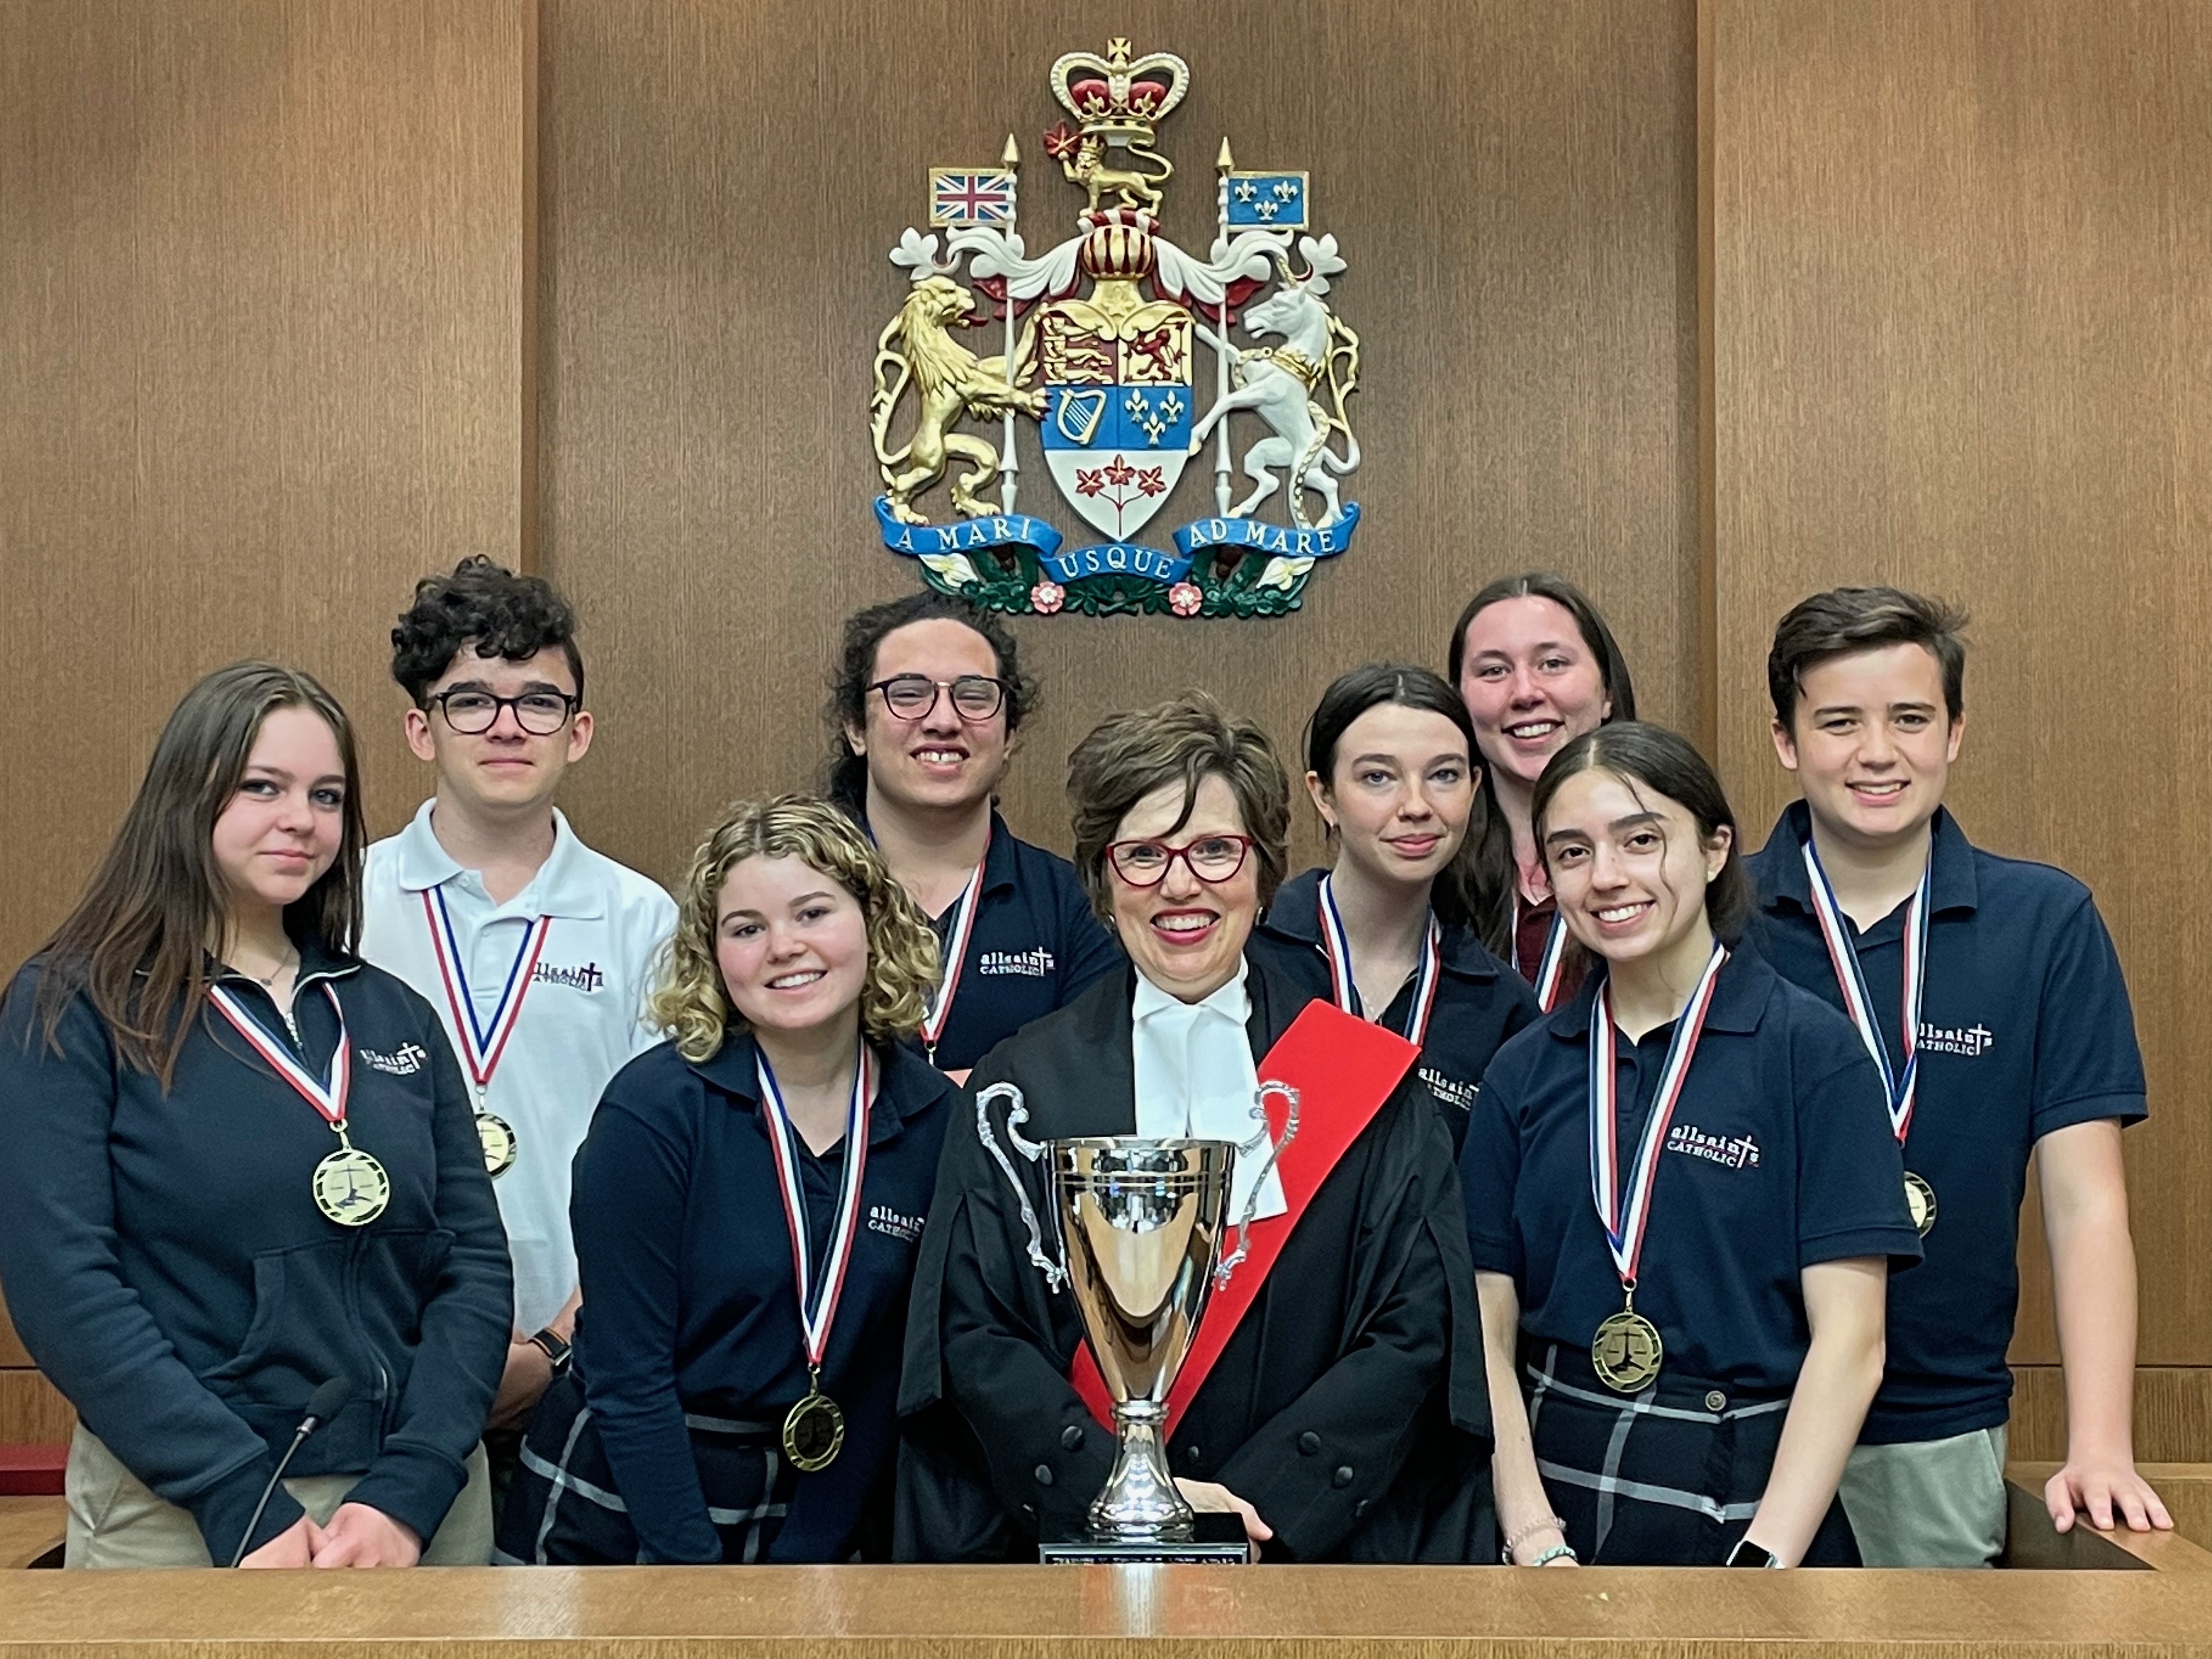 Group of All Saints law students with Ontario Judge